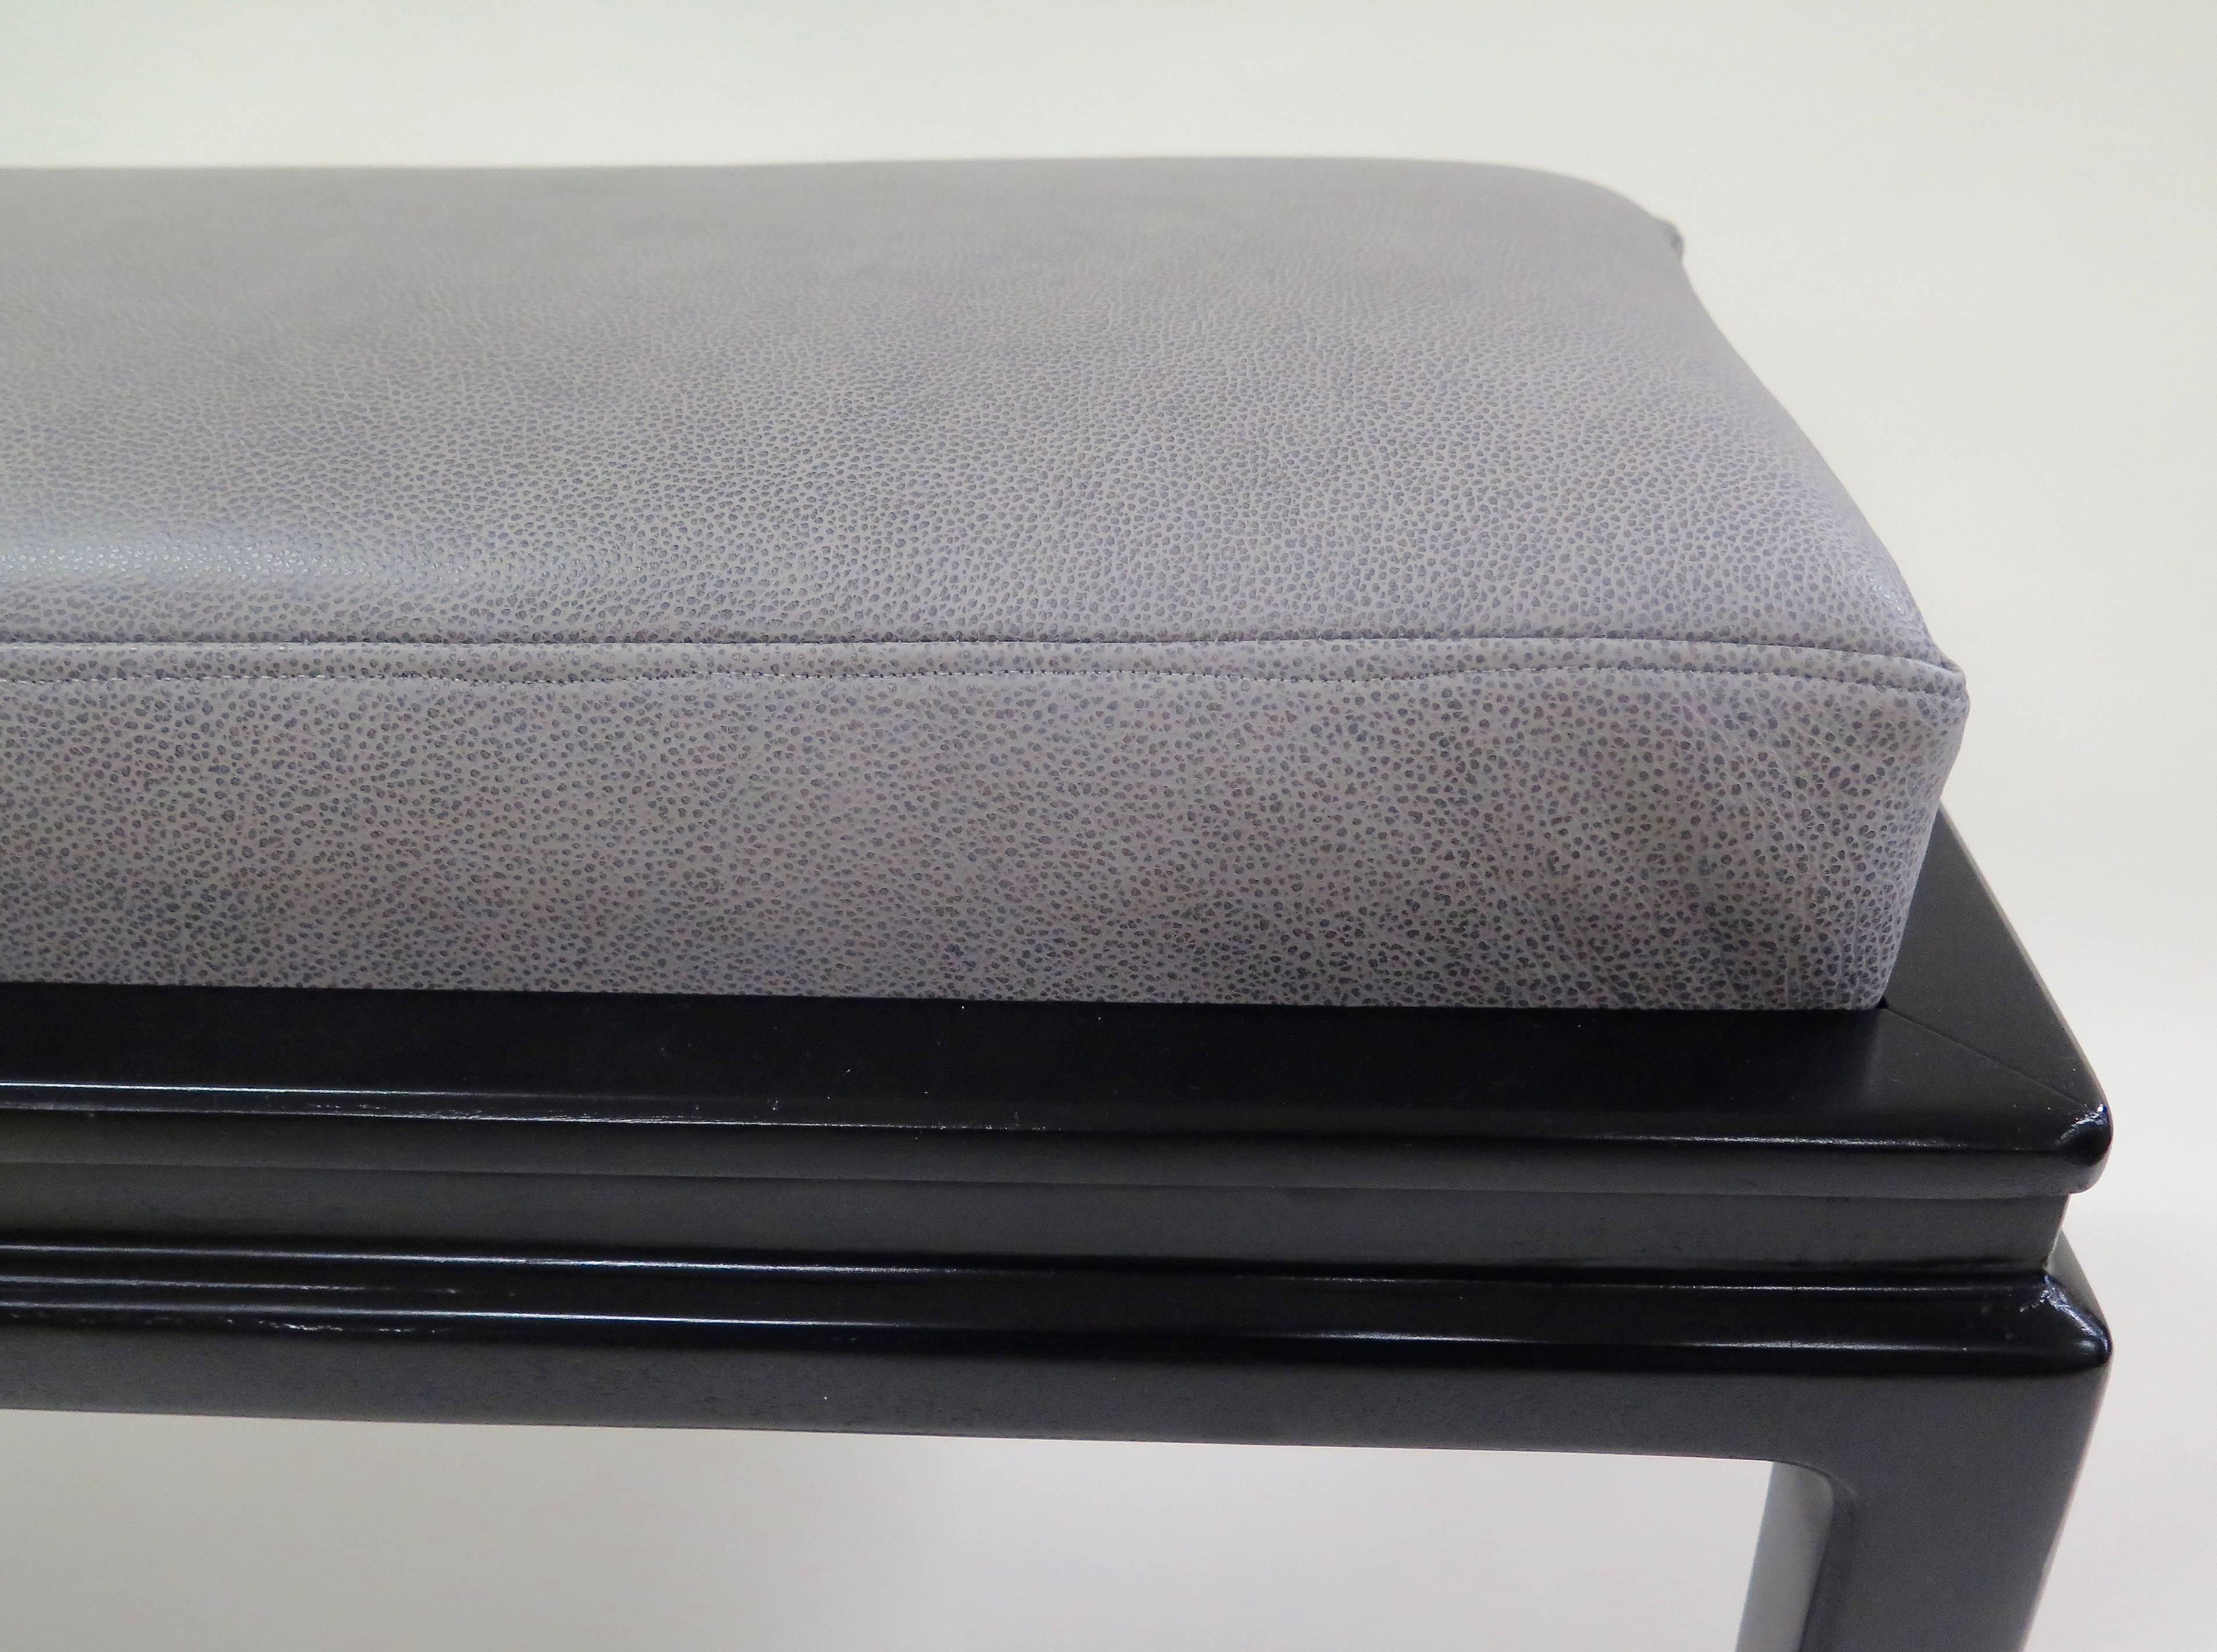 Signed and numbered 4525. New grey leather. New black lacquer. A great narrow bench with Asian-influence design.